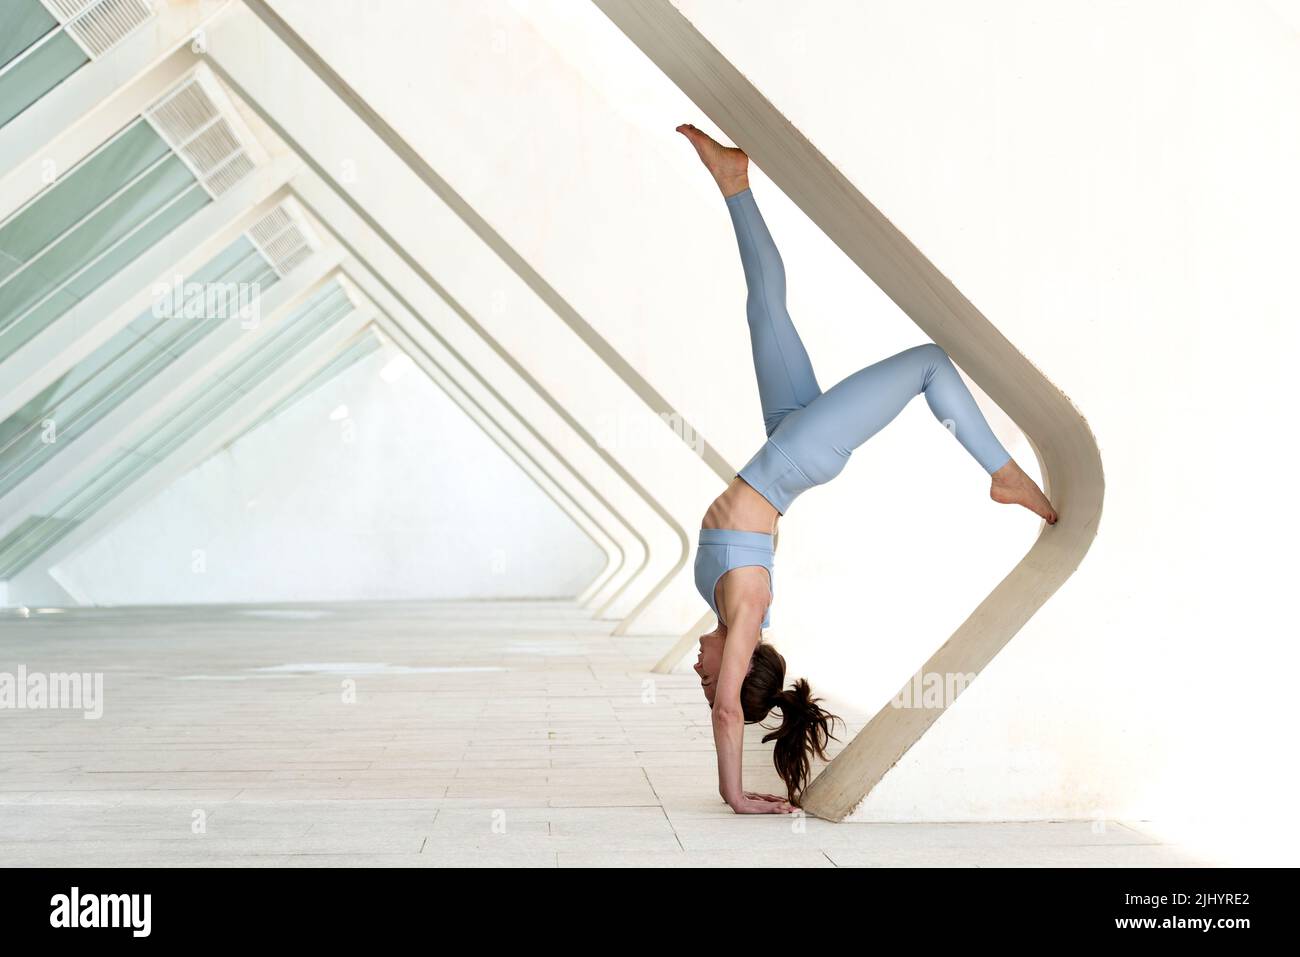 Woman doing a handstand against a concrete arch. Exercise outdoors. Stock Photo